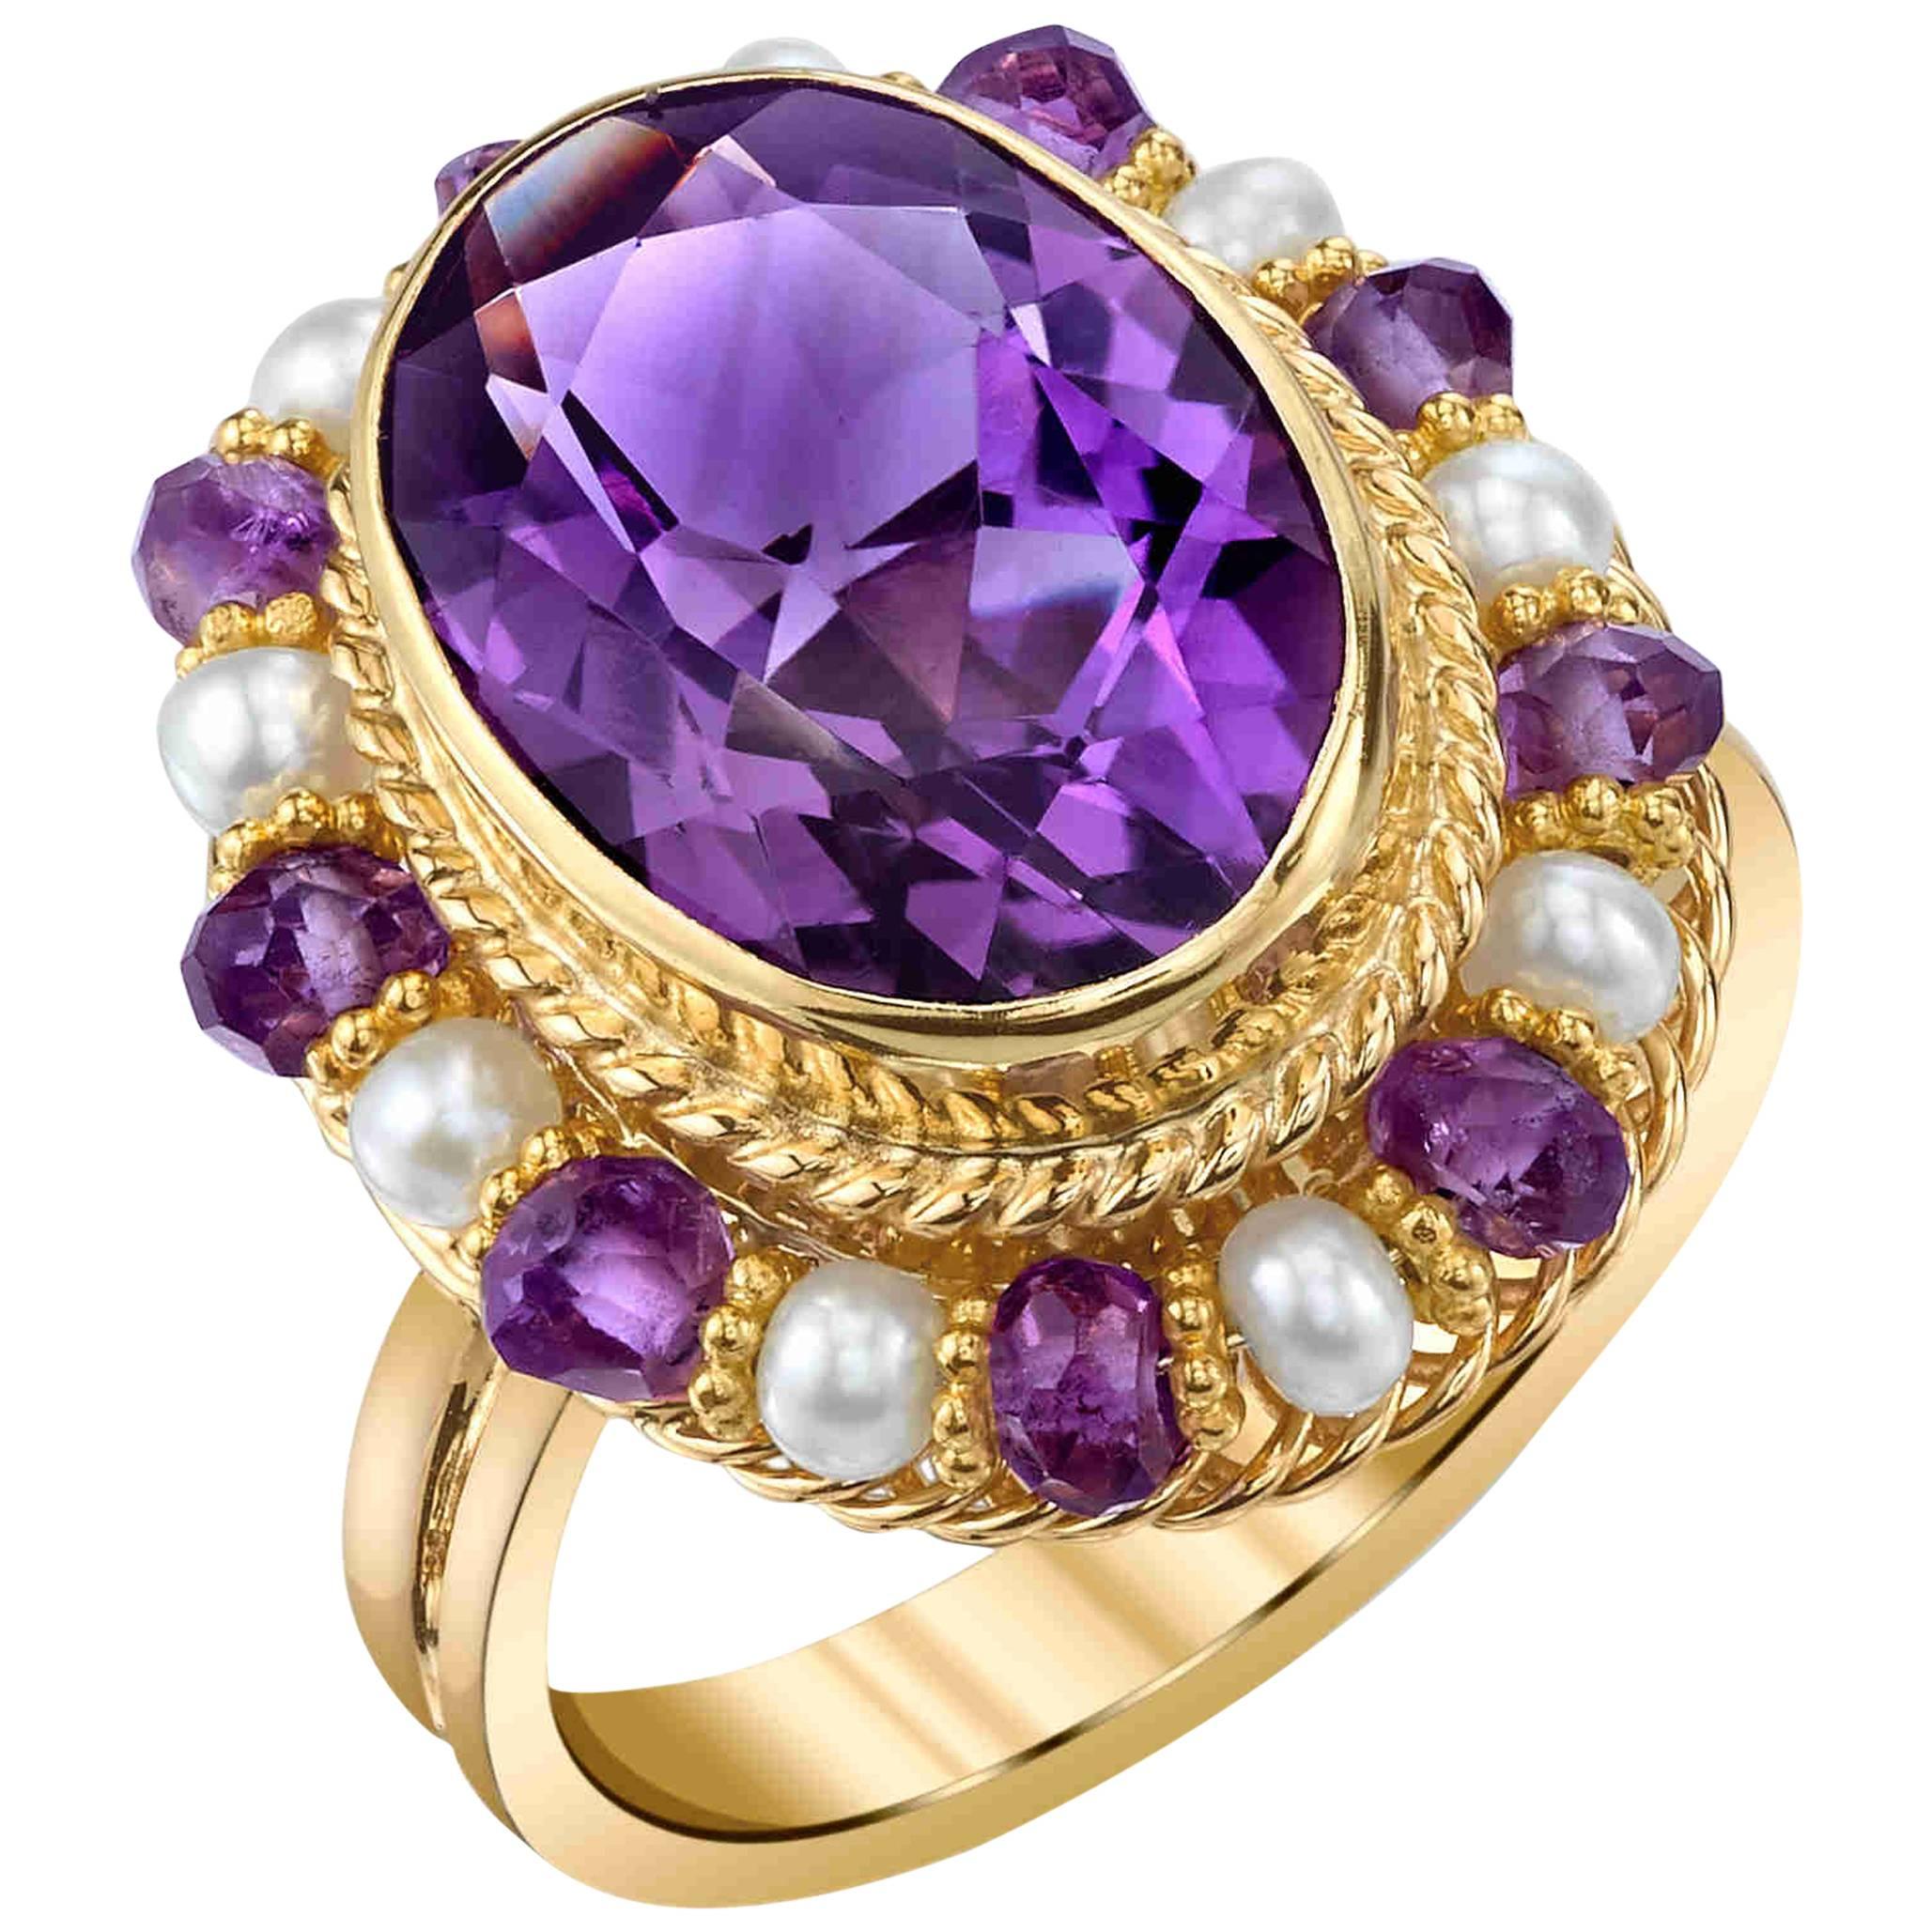 Amethyst 18k Yellow Gold Filigree Ring with Pearls